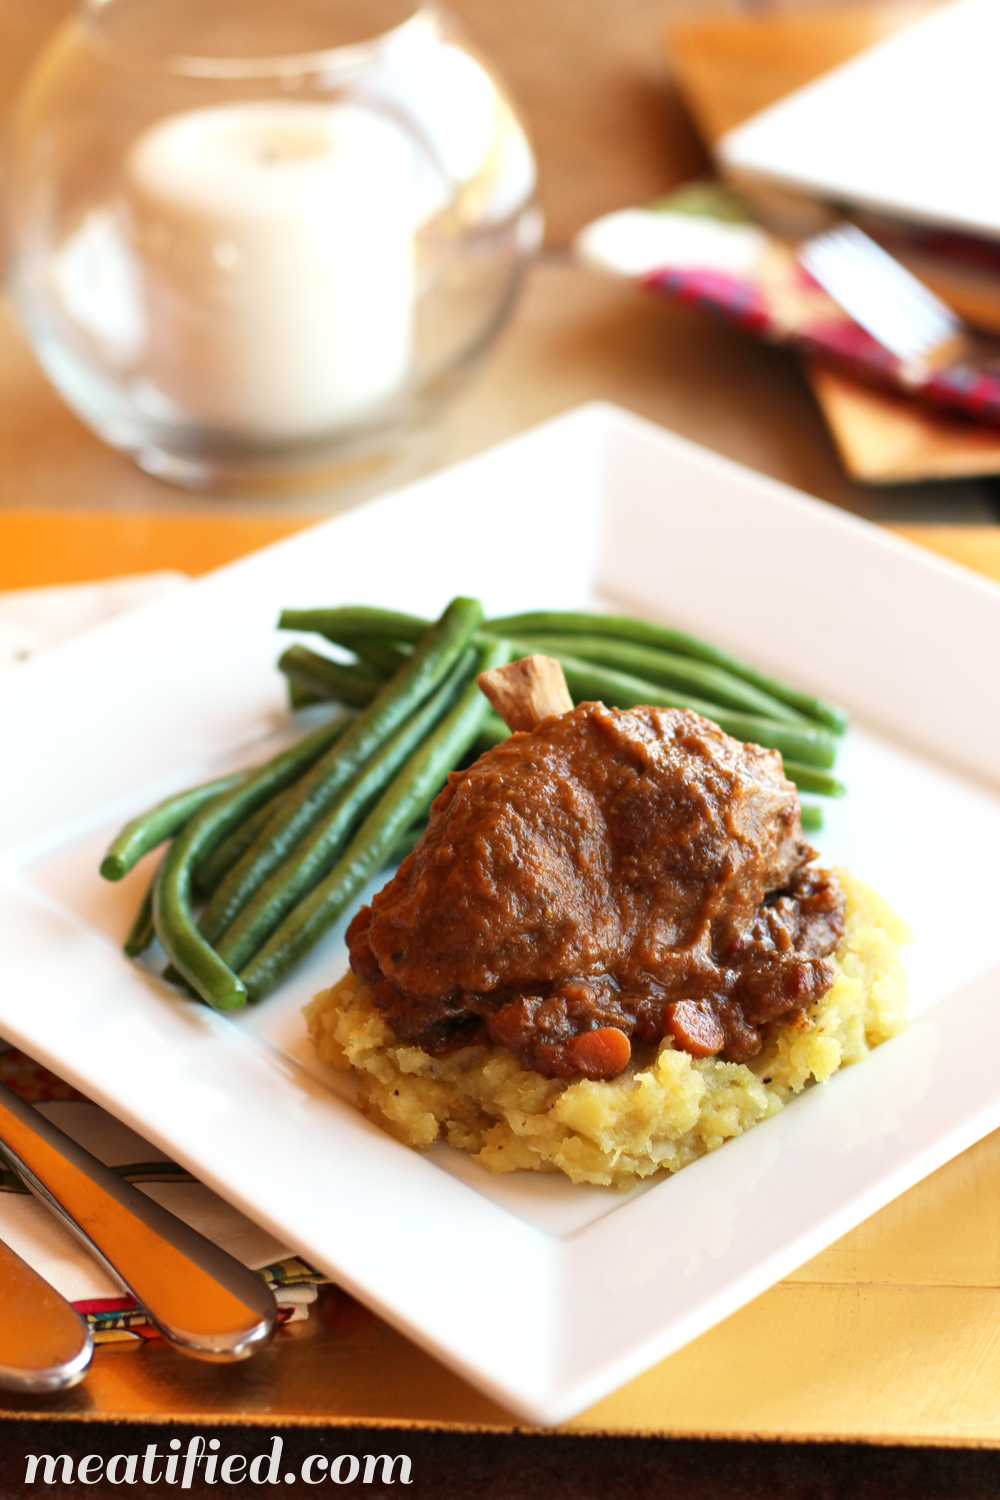 Slow Cooker Pork Shanks from http://meatified.com #paleo #whole30 #glutenfree